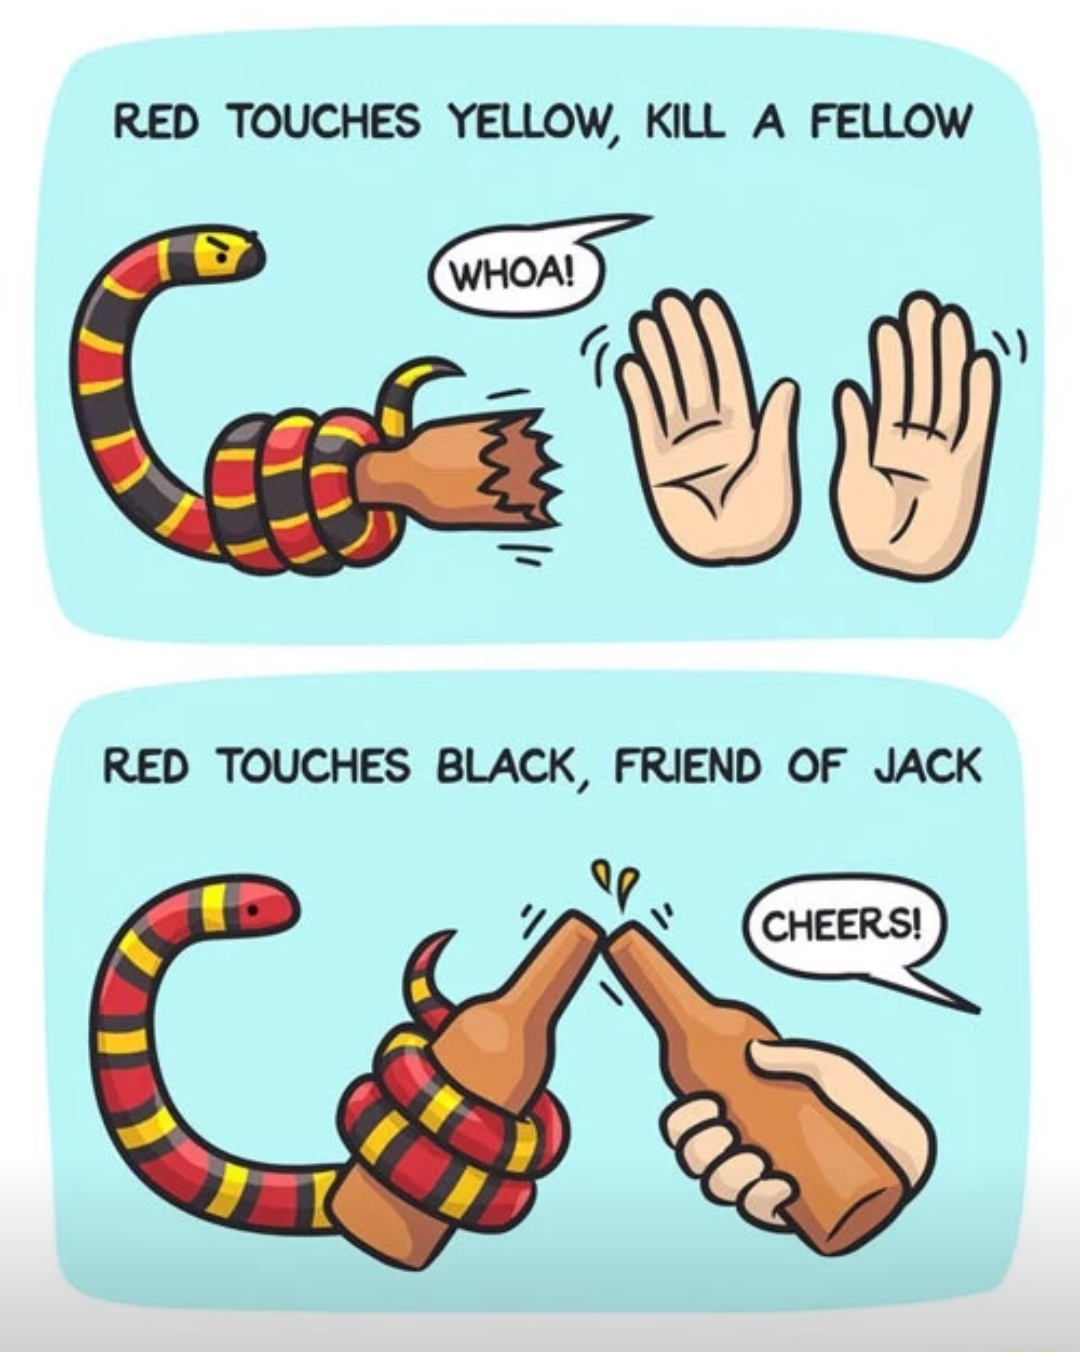 red touch black - Red Touches Yellow, Kill A Fellow Whoa! Red Touches Black, Friend Of Jack Cheers!